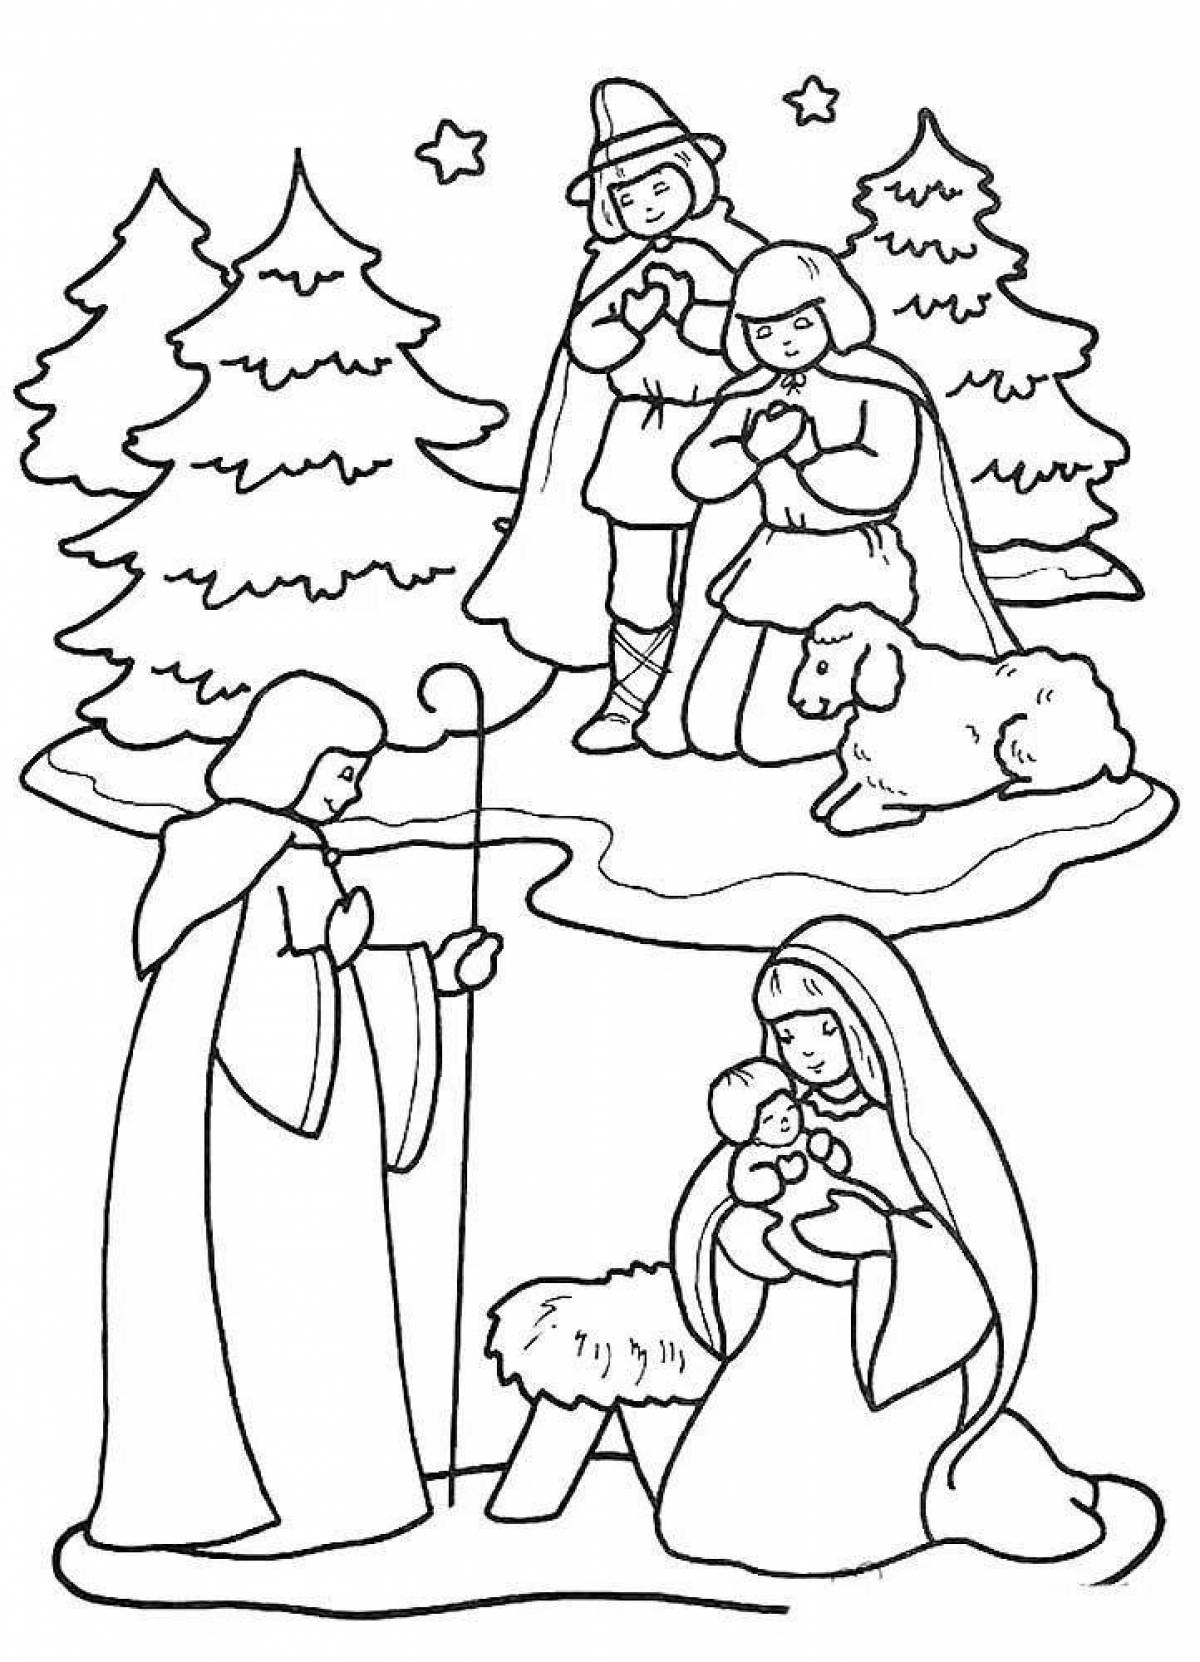 Sublime christmas coloring page